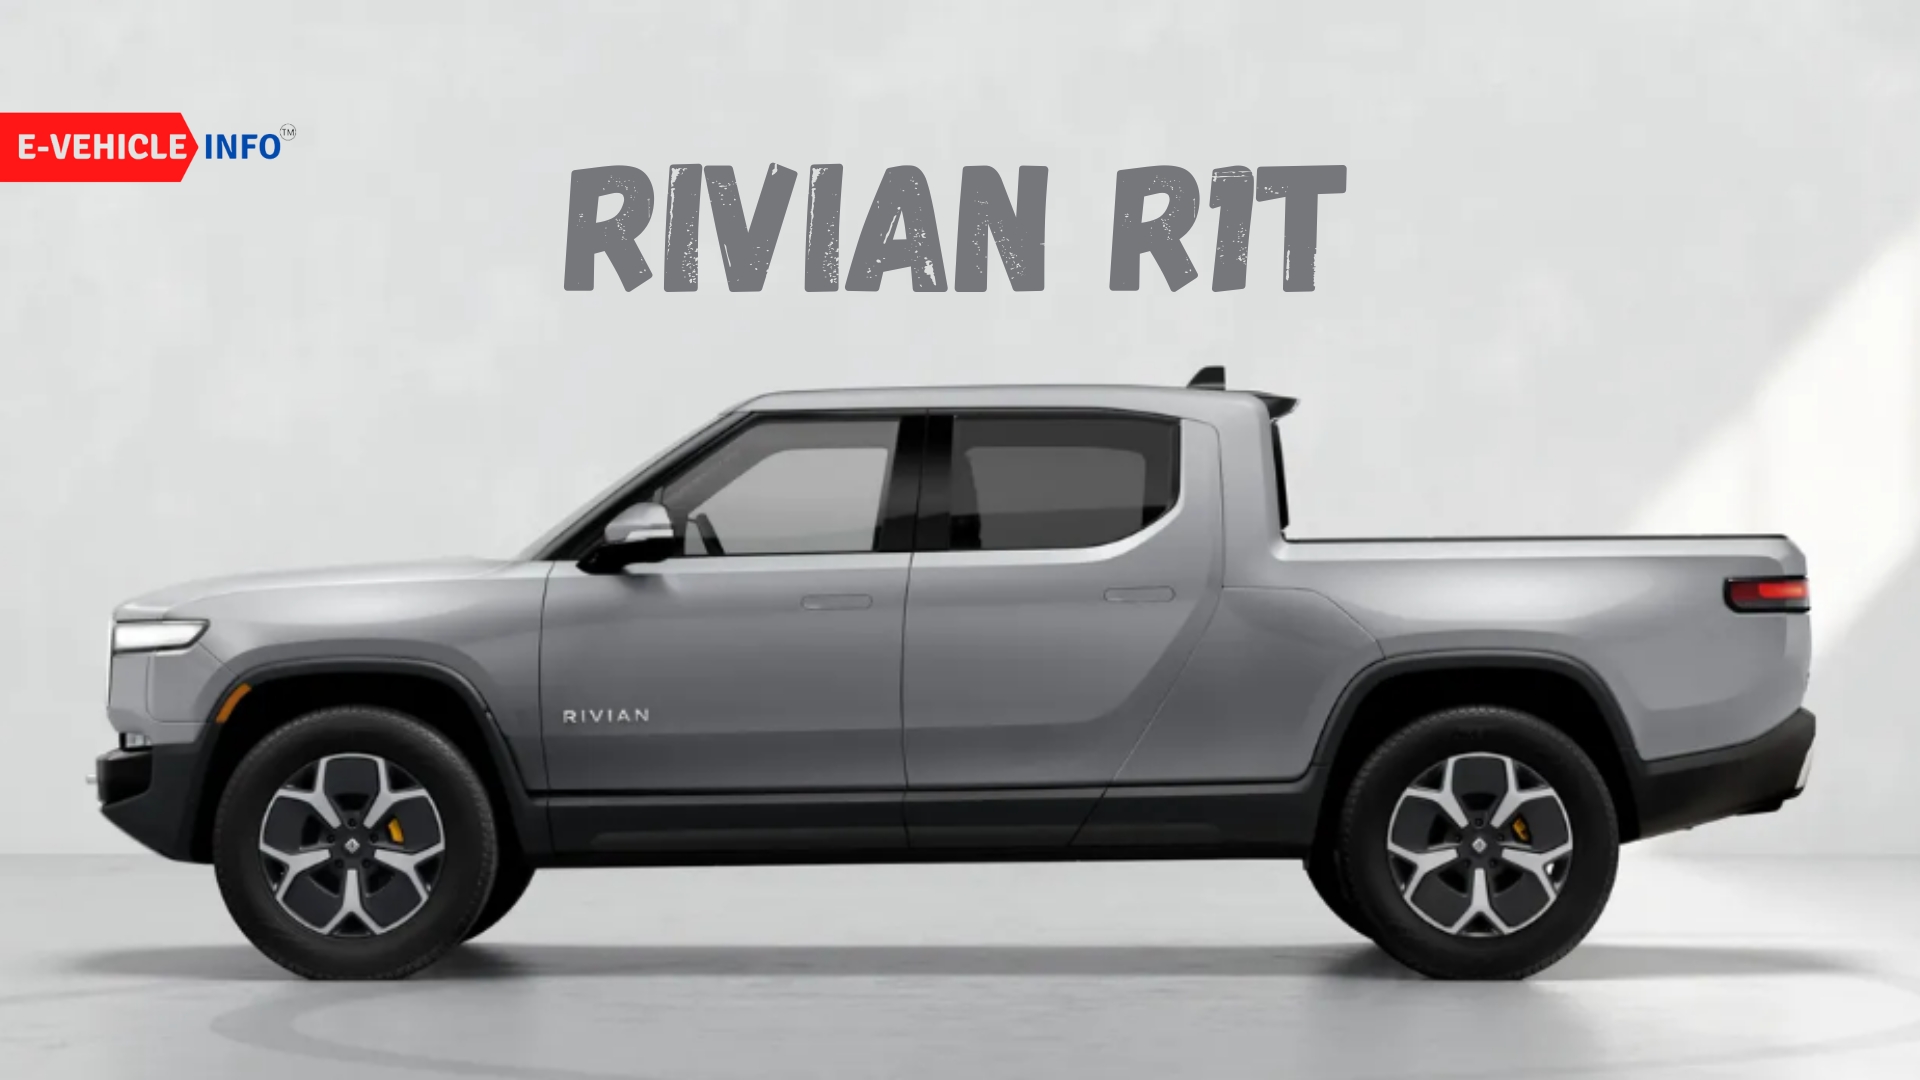 https://e-vehicleinfo.com/global/rivian-r1t-electric-pickup-price-range-and-specification/